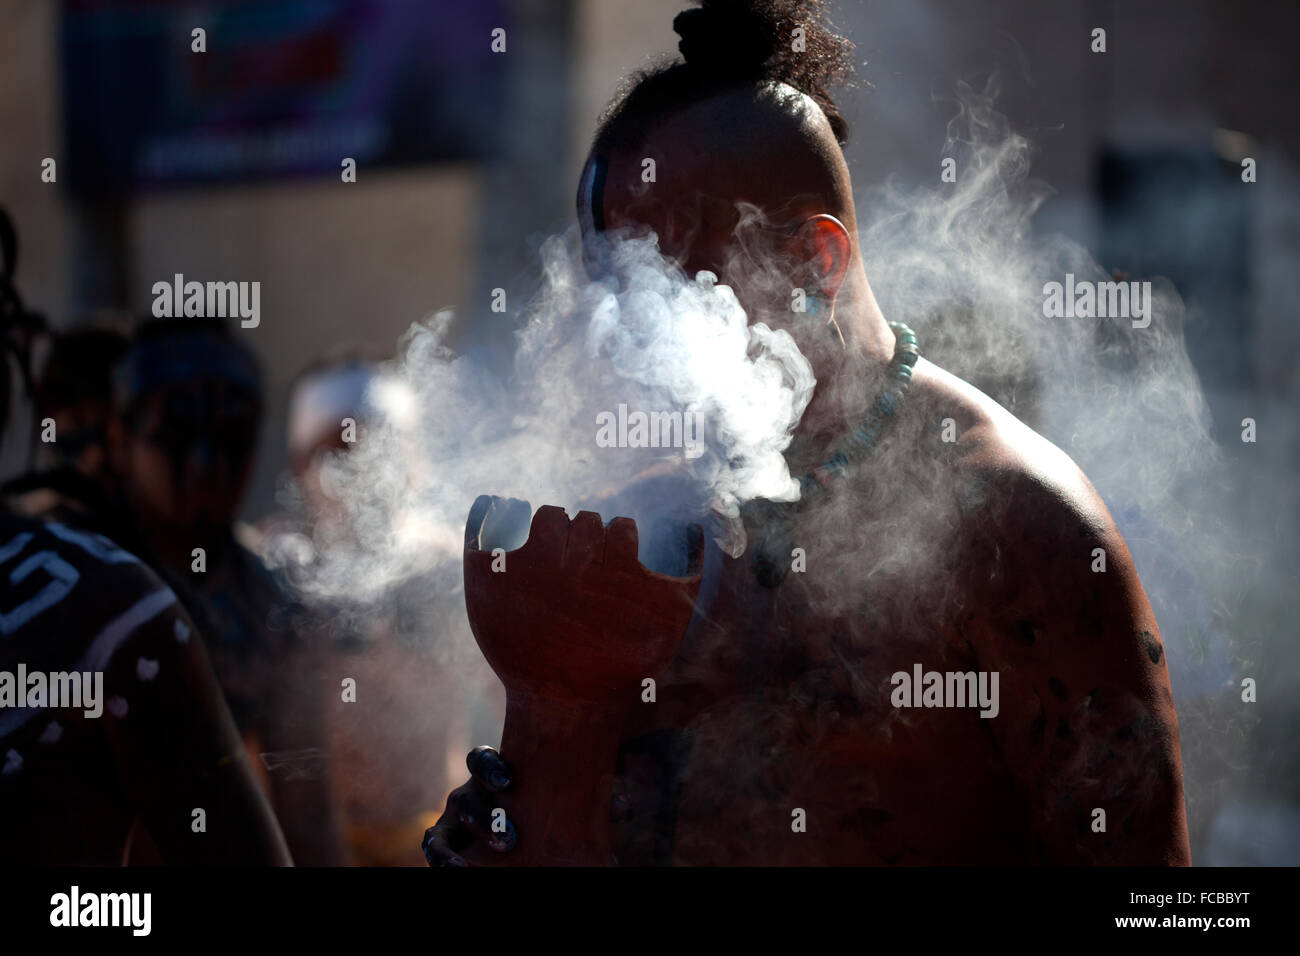 A Mayan Ball Player from ?Pucxical Keej? team , Playa del Carmen, Quintana Roo, spreads incense at the first ®Pok Ta Pok® World Stock Photo